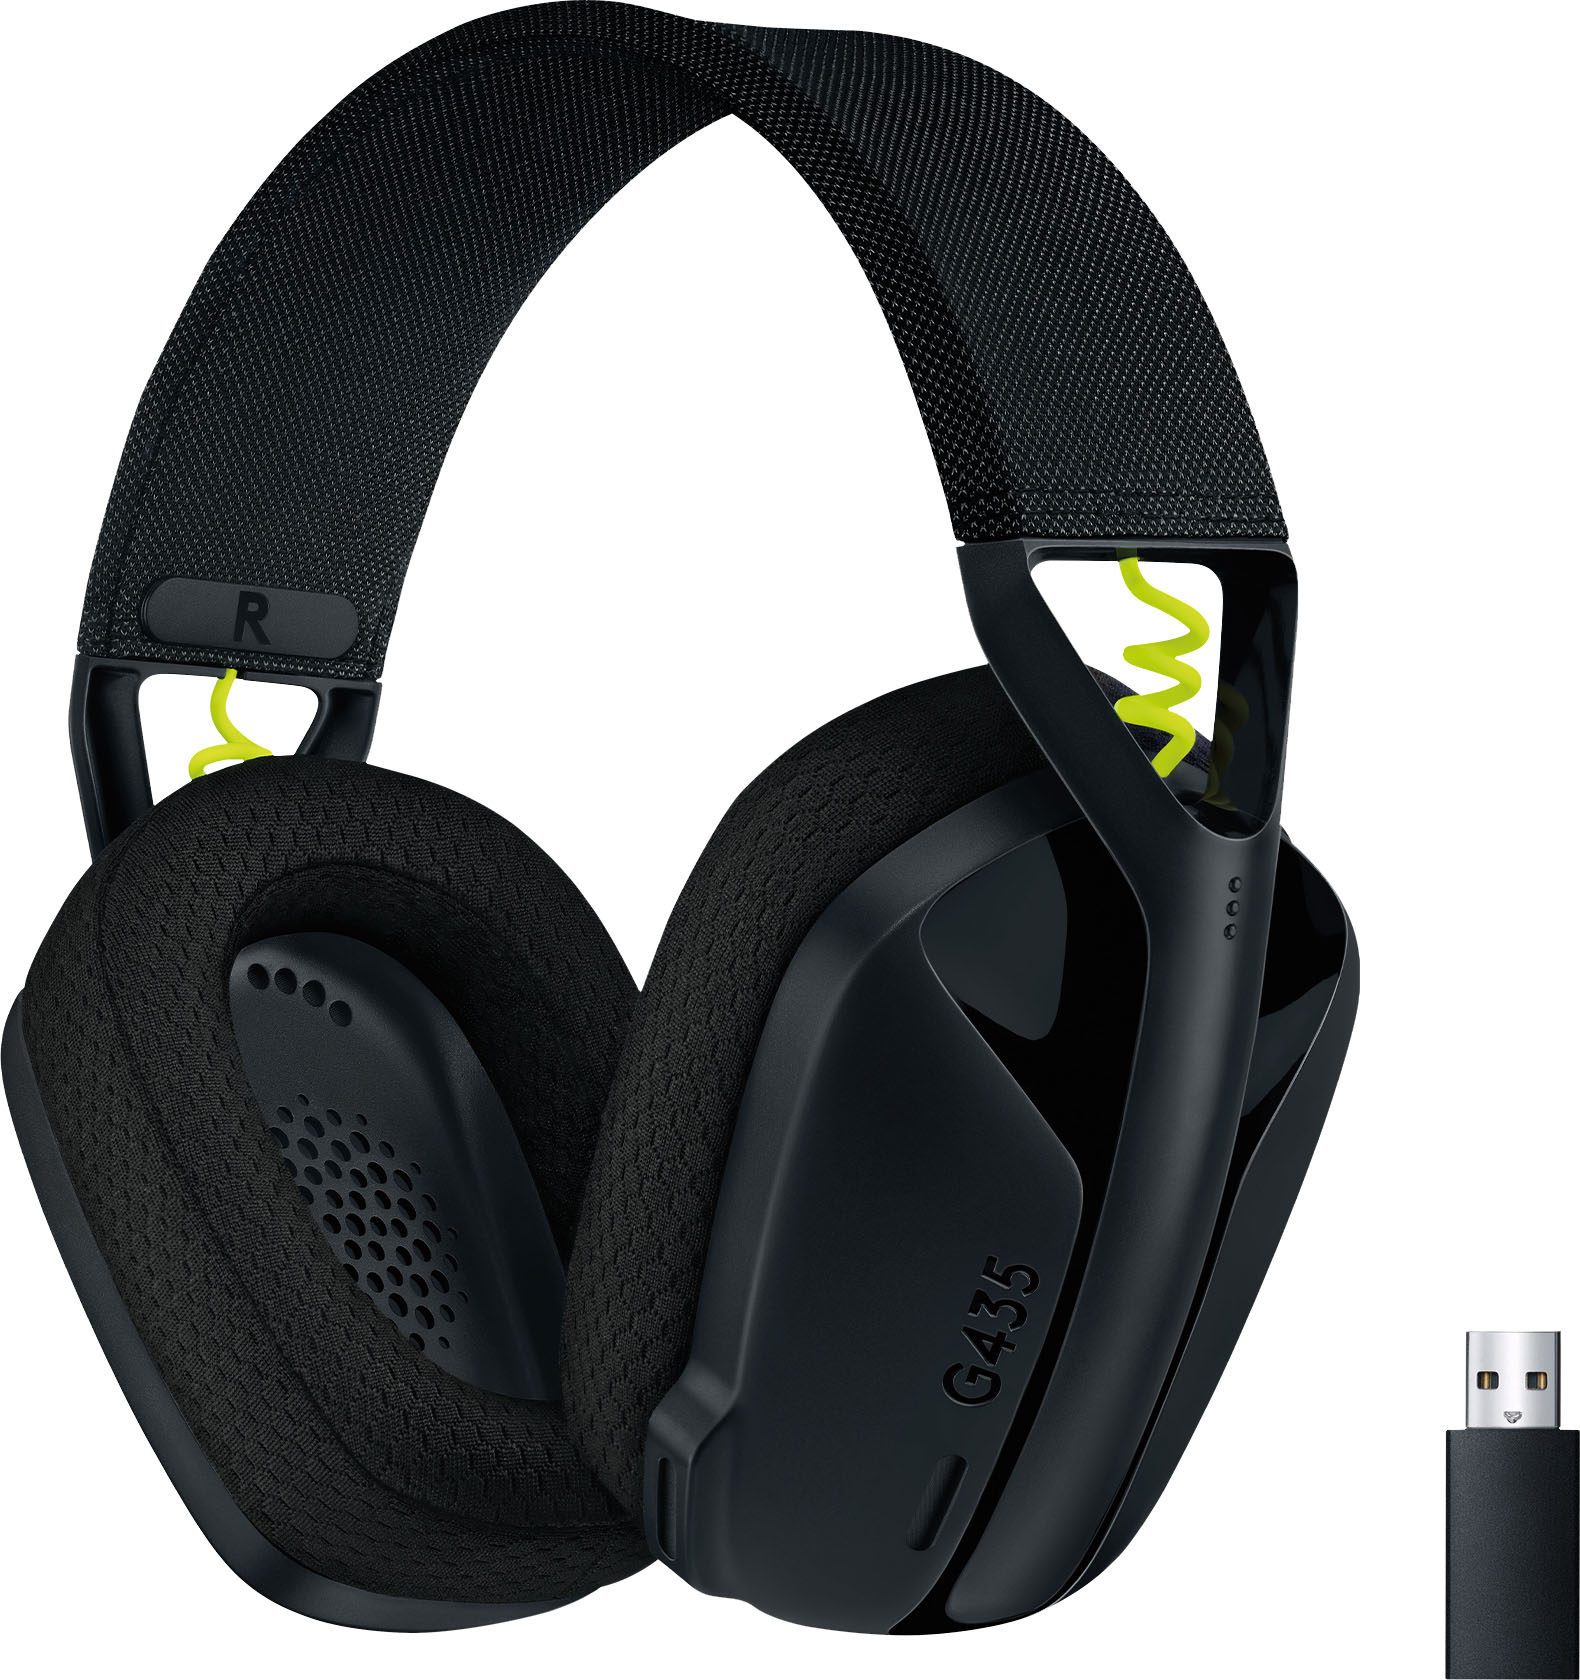 impliceren vasthouden leren Logitech G435 Wireless Dolby Atmos Over-the-Ear Gaming Headset for PC, PS4,  PS5, Nintendo Switch, Mobile with Built-in Mic Black 981-001049 - Best Buy